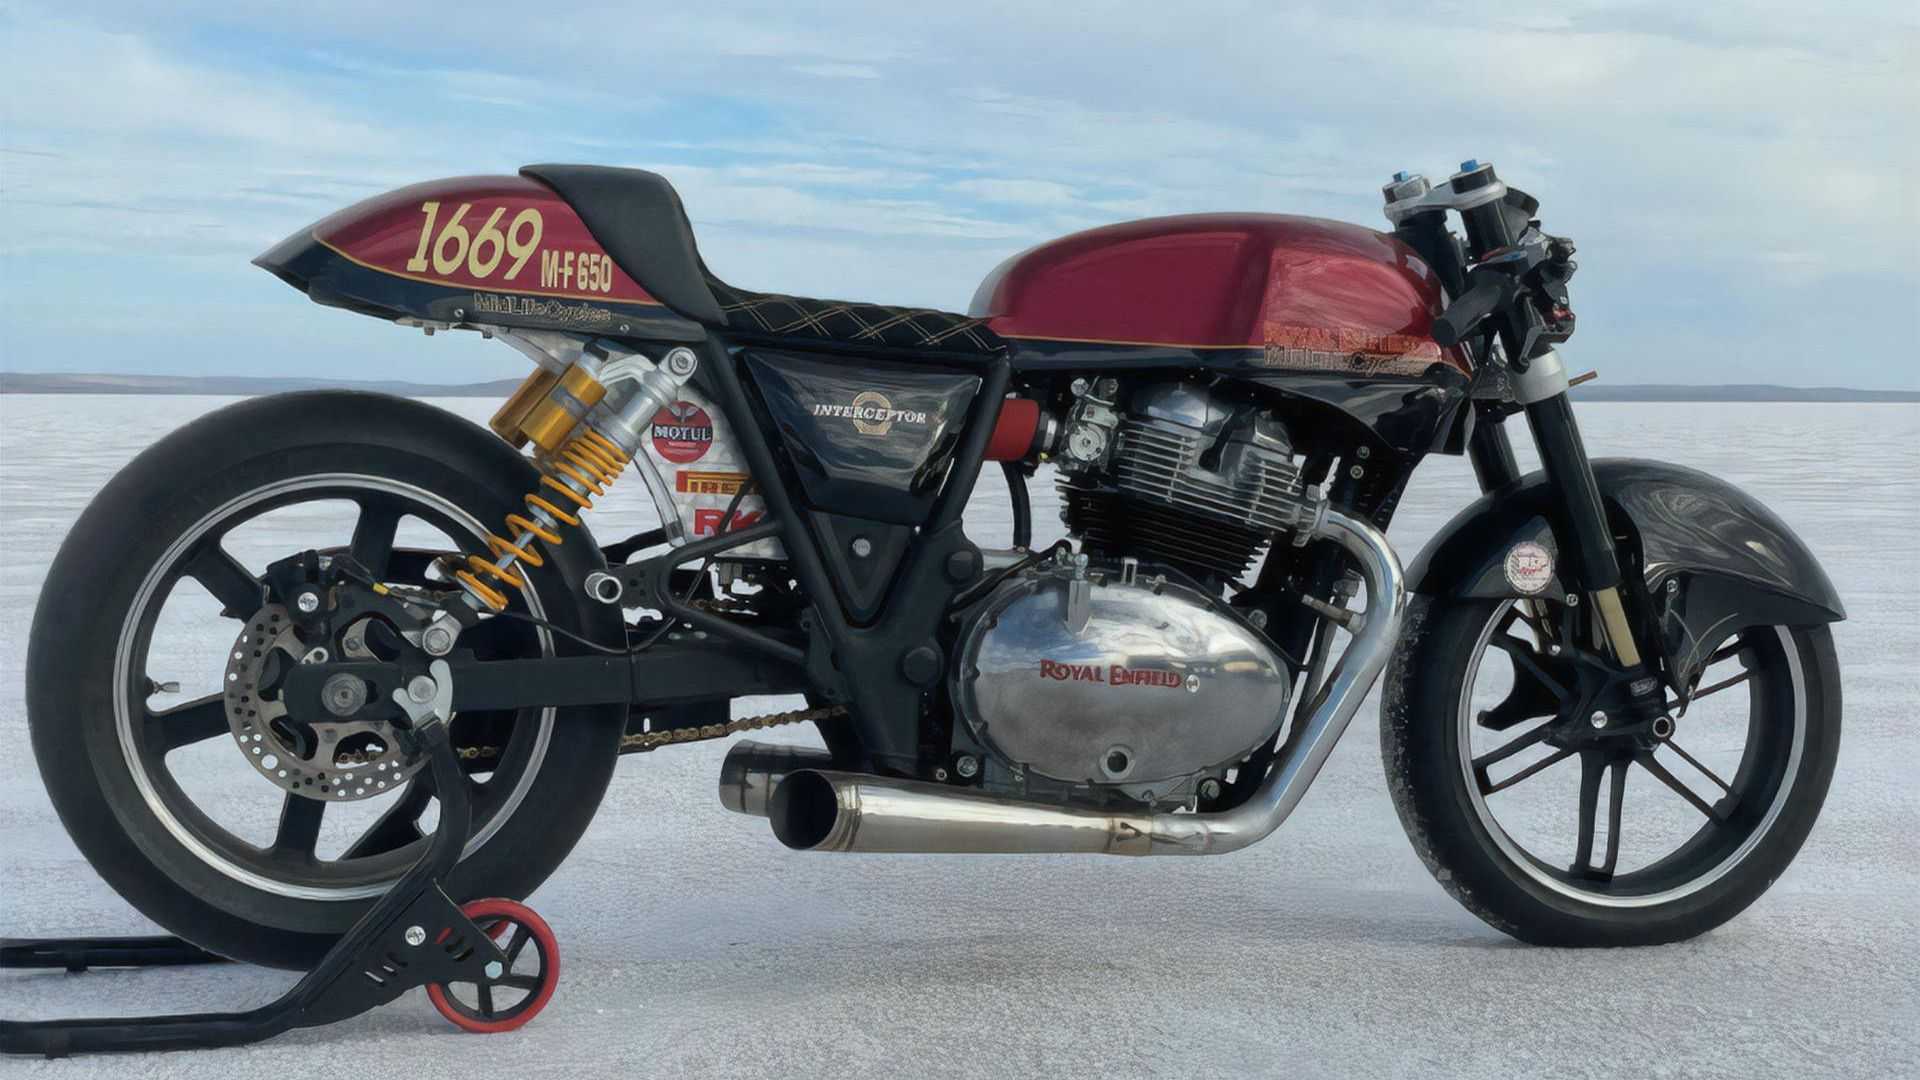 Royal Enfield Interceptor 650 breaks land speed record
- also in the MOTORCYCLES.NEWS APP